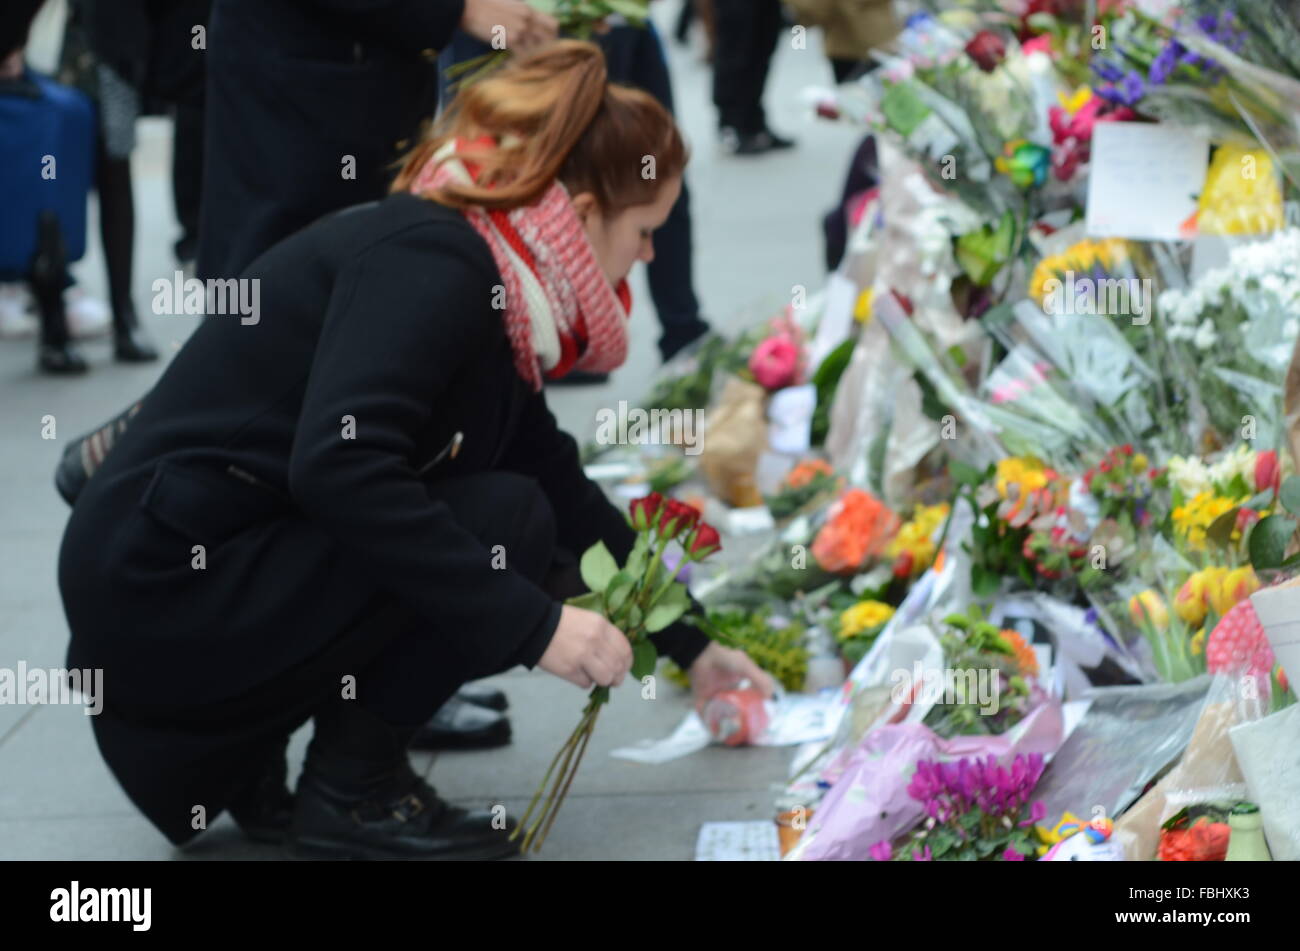 floral tributes laid before the David bowie mural, Stock Photo